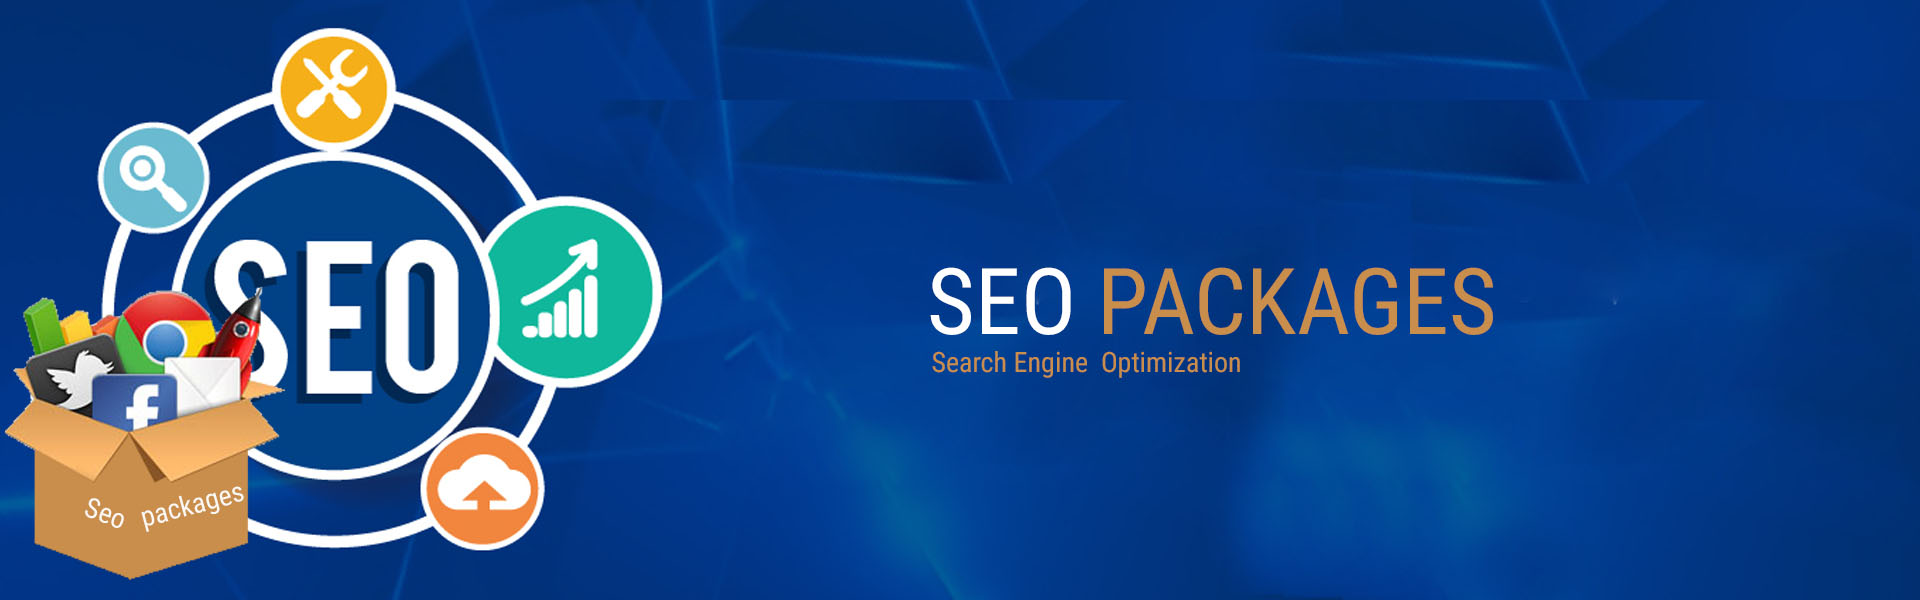 Top 7 Reasons for Avoiding Affordable SEO Packages and Prices